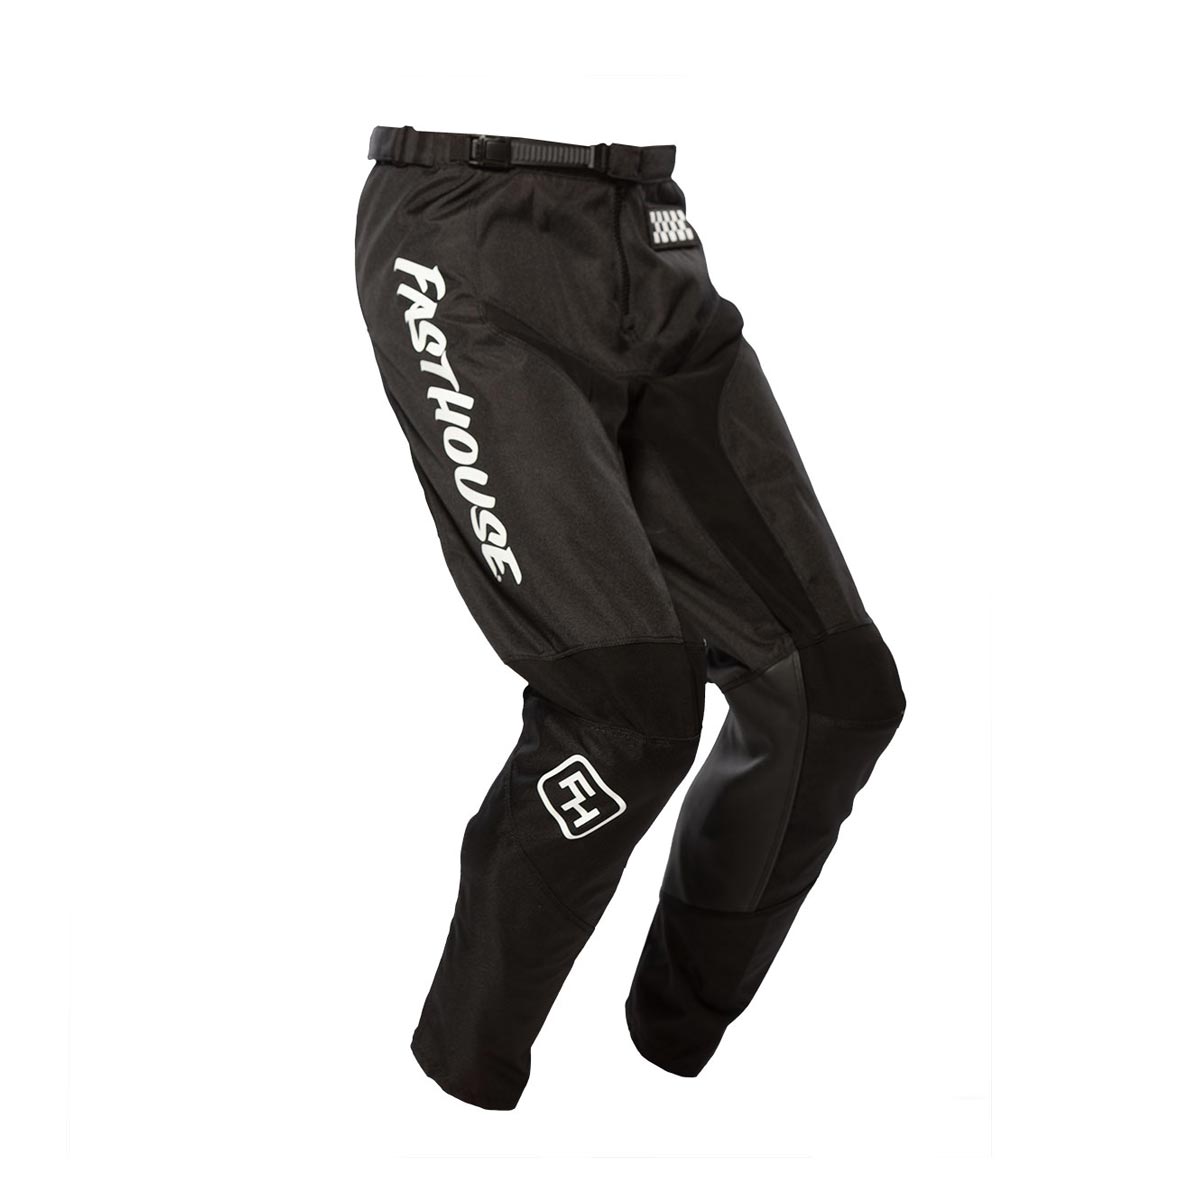 Carbon Youth Pant - Black